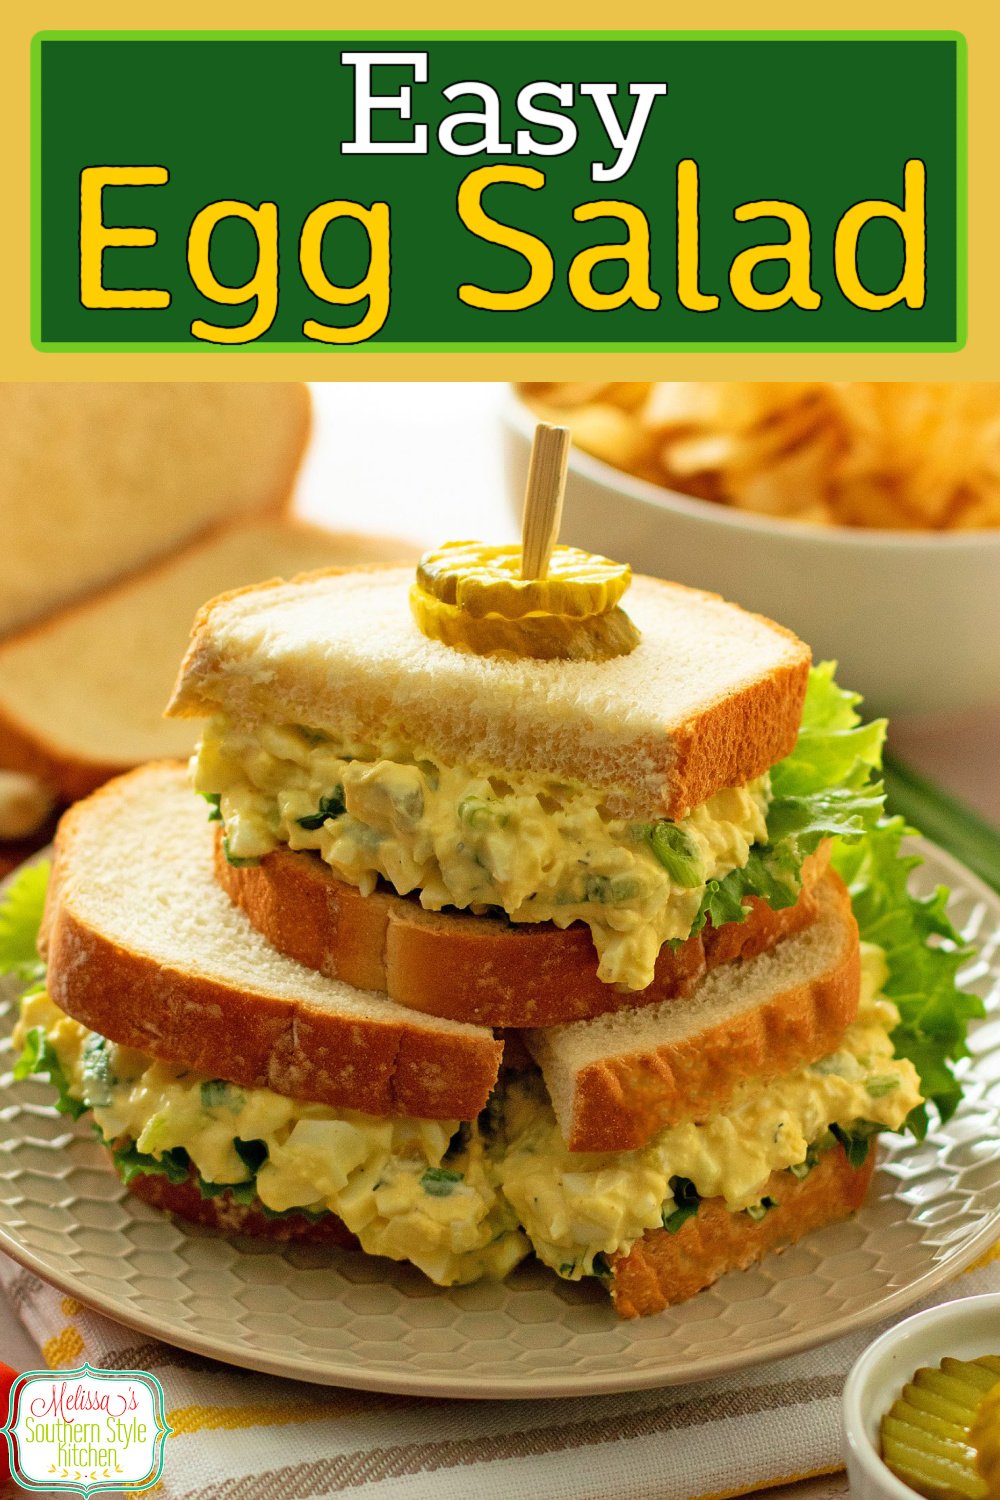 This easy Egg Salad Recipe can be served on artisan bread, rolls or croissants for a quick and delicious meal #eggsalad #saladrecipes #easyeggsalad #eggrecipes #hardboiledeggs #eggrecipes via @melissasssk